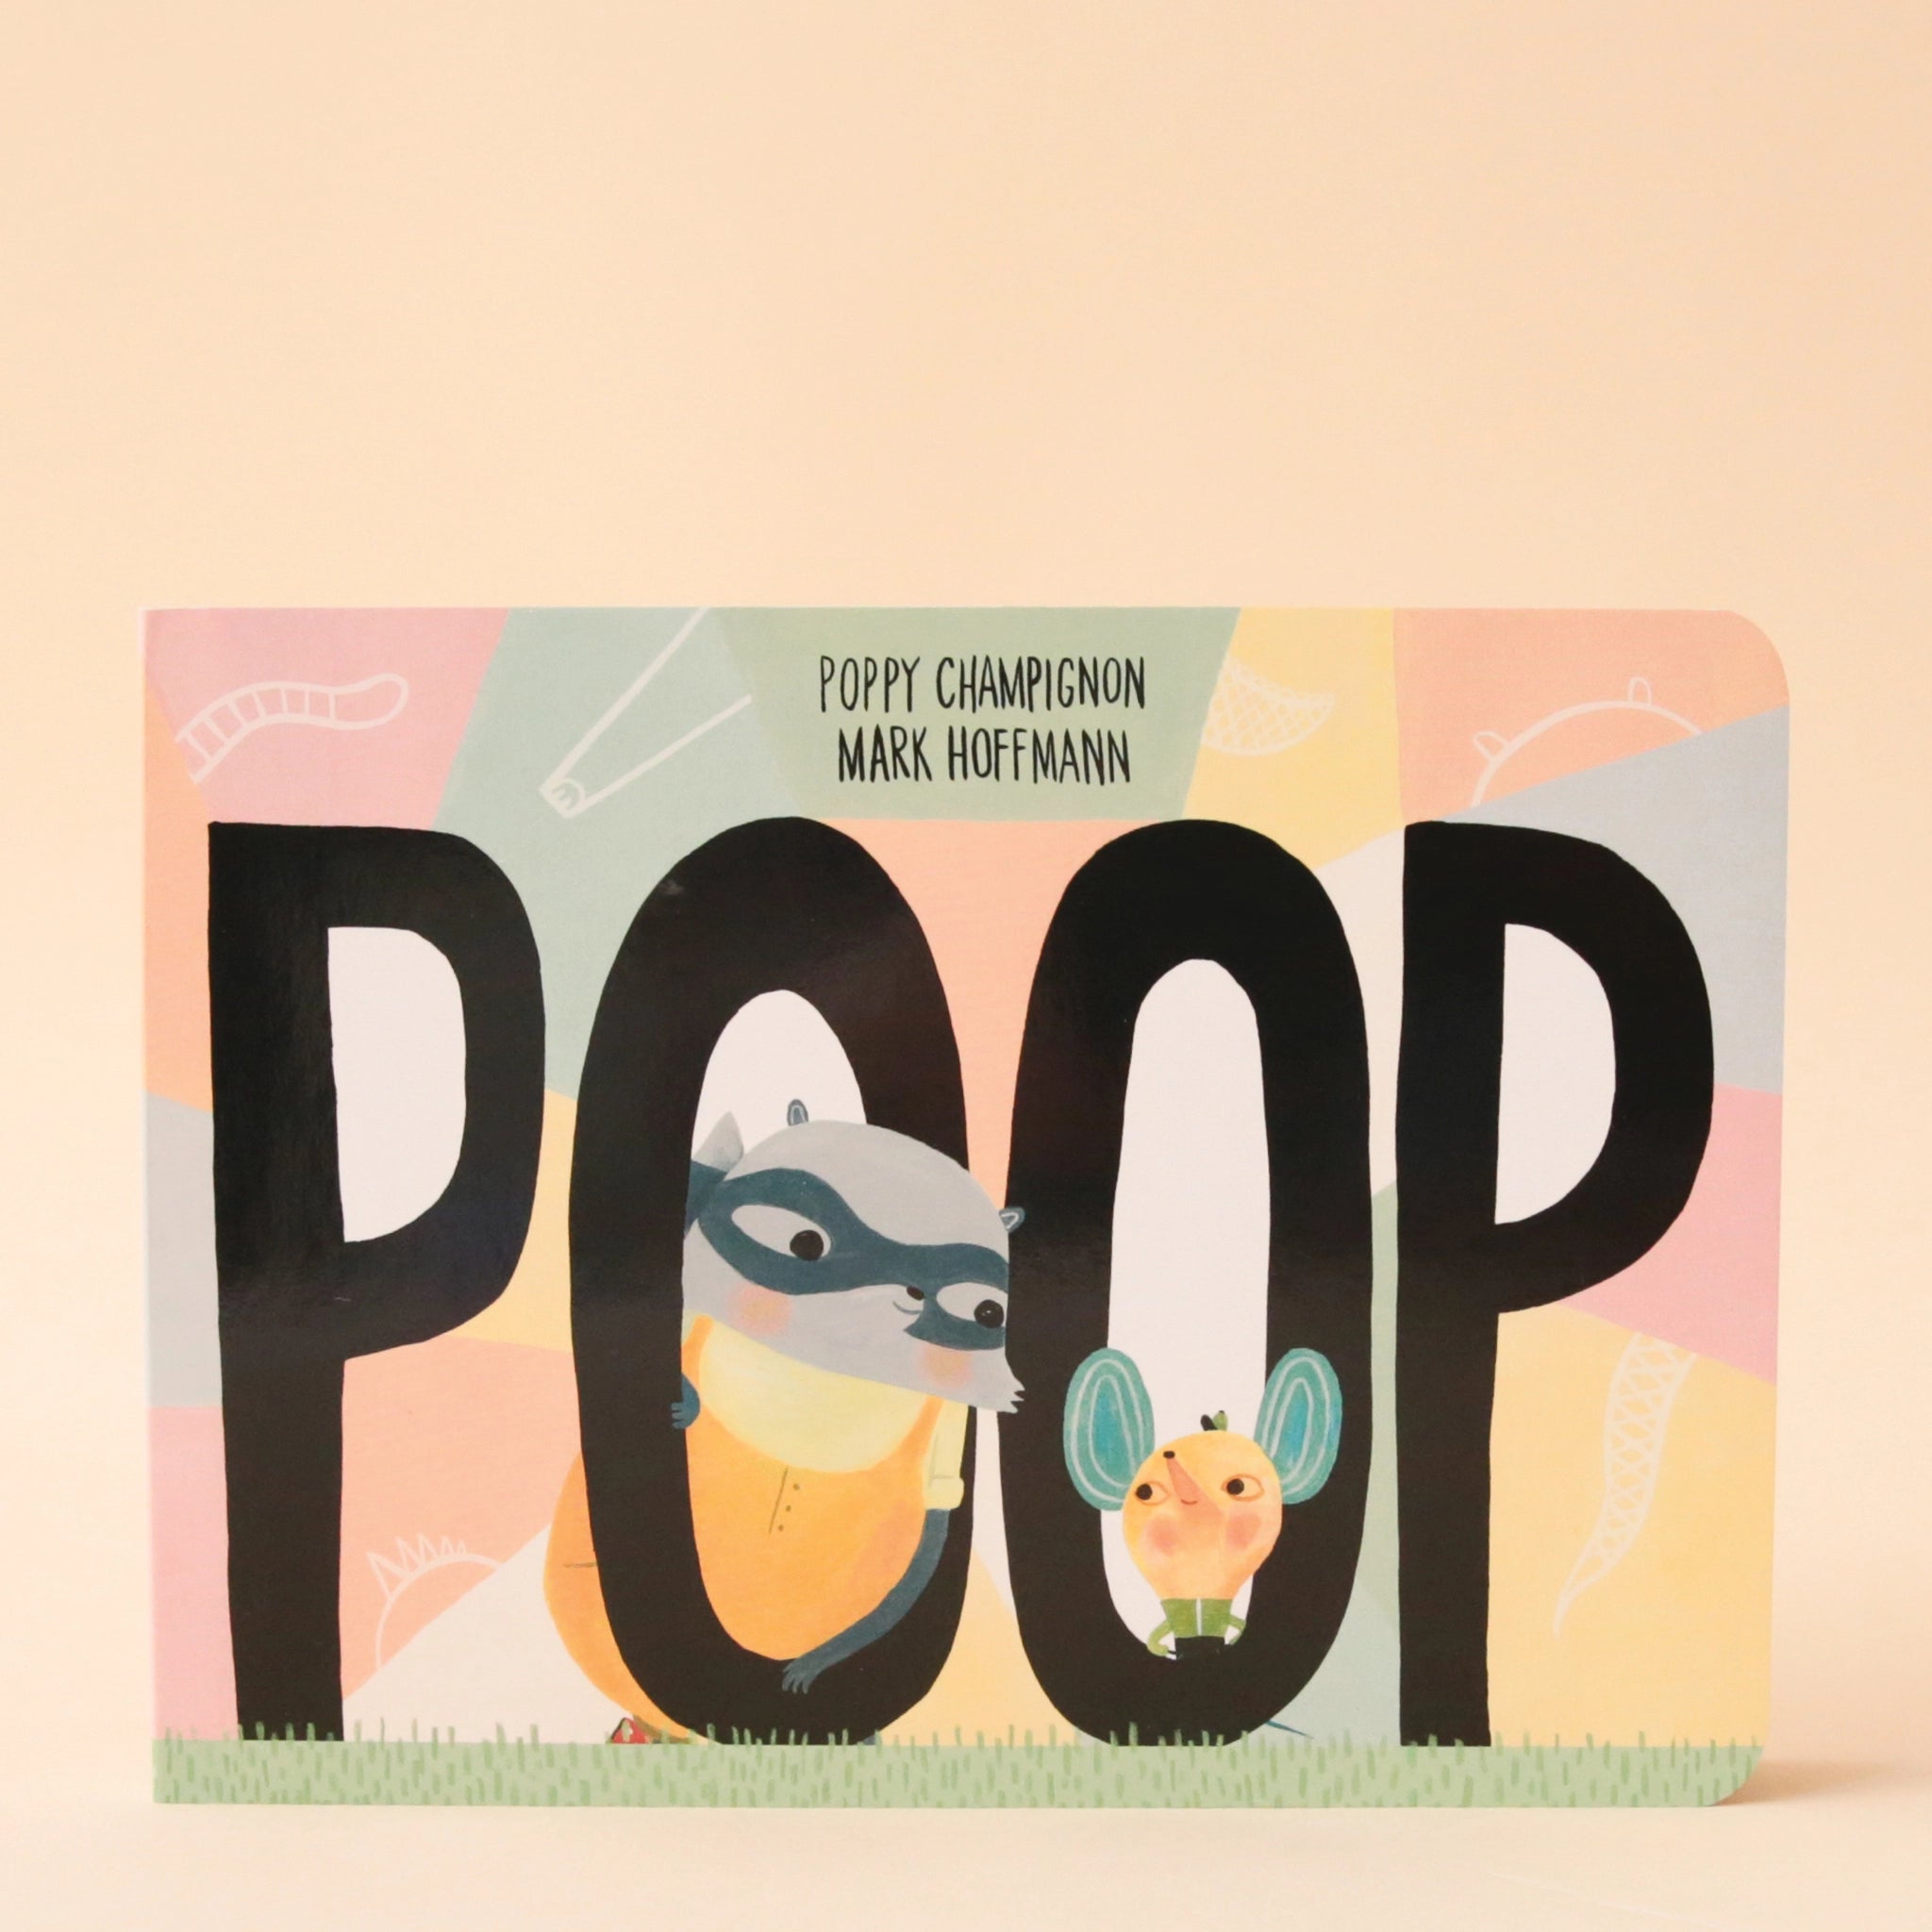 A multicolored design on the front cover along with large black letters that read, "POOP" along with a recon and little mouse character standing in the center of the 'O'.